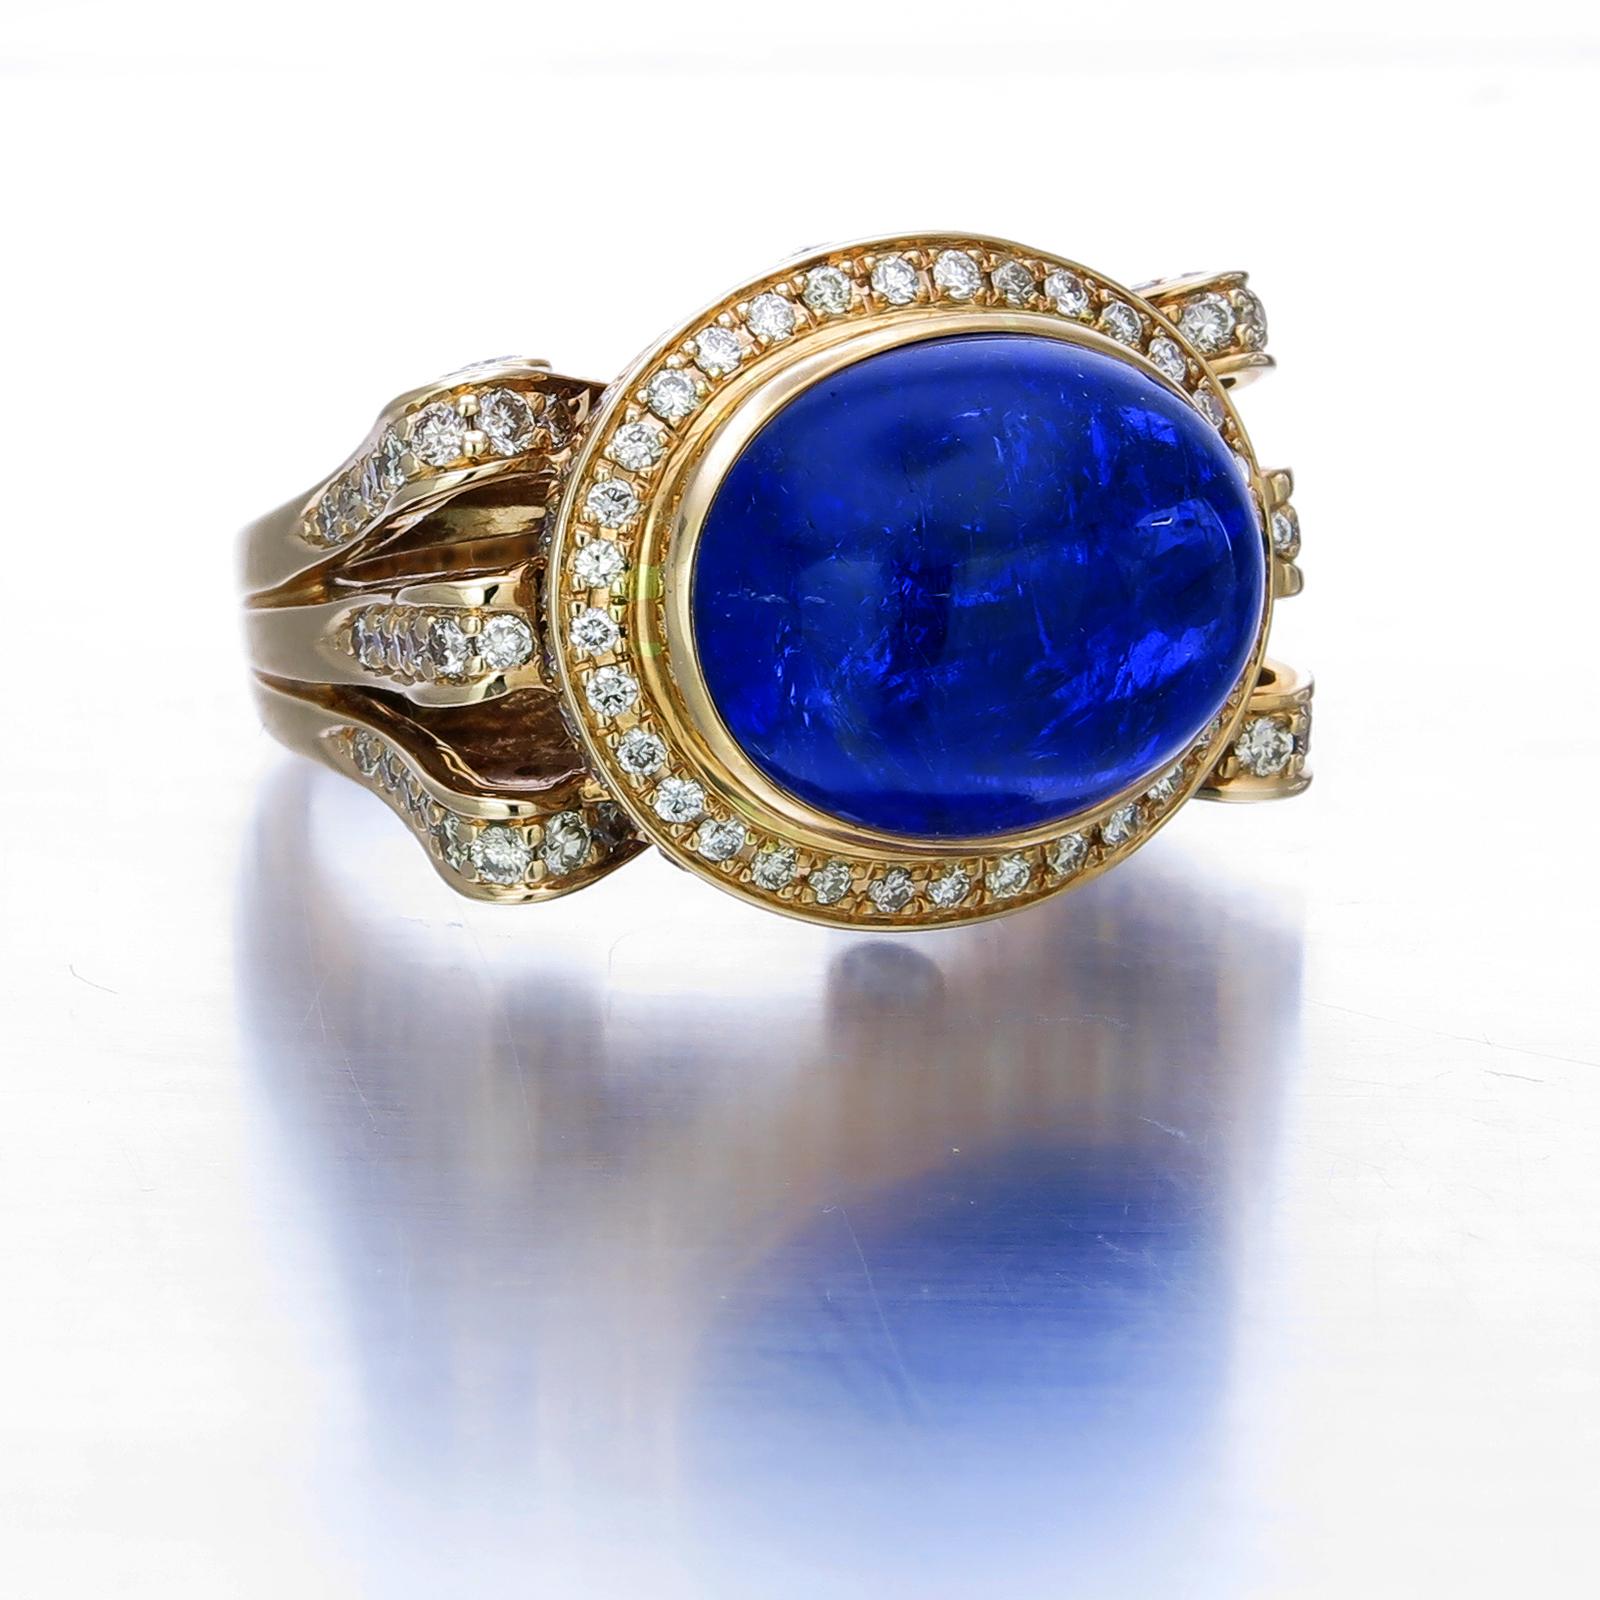 The depth of blue in this 14.30-carat oval Tanzanite is mesmerizing as it rests on a well-crafted 18K gold ring surrounded by sparkling 1.68-carat White Diamonds. An adjustable gold band in the ring provides a more secure fit and an extra level of